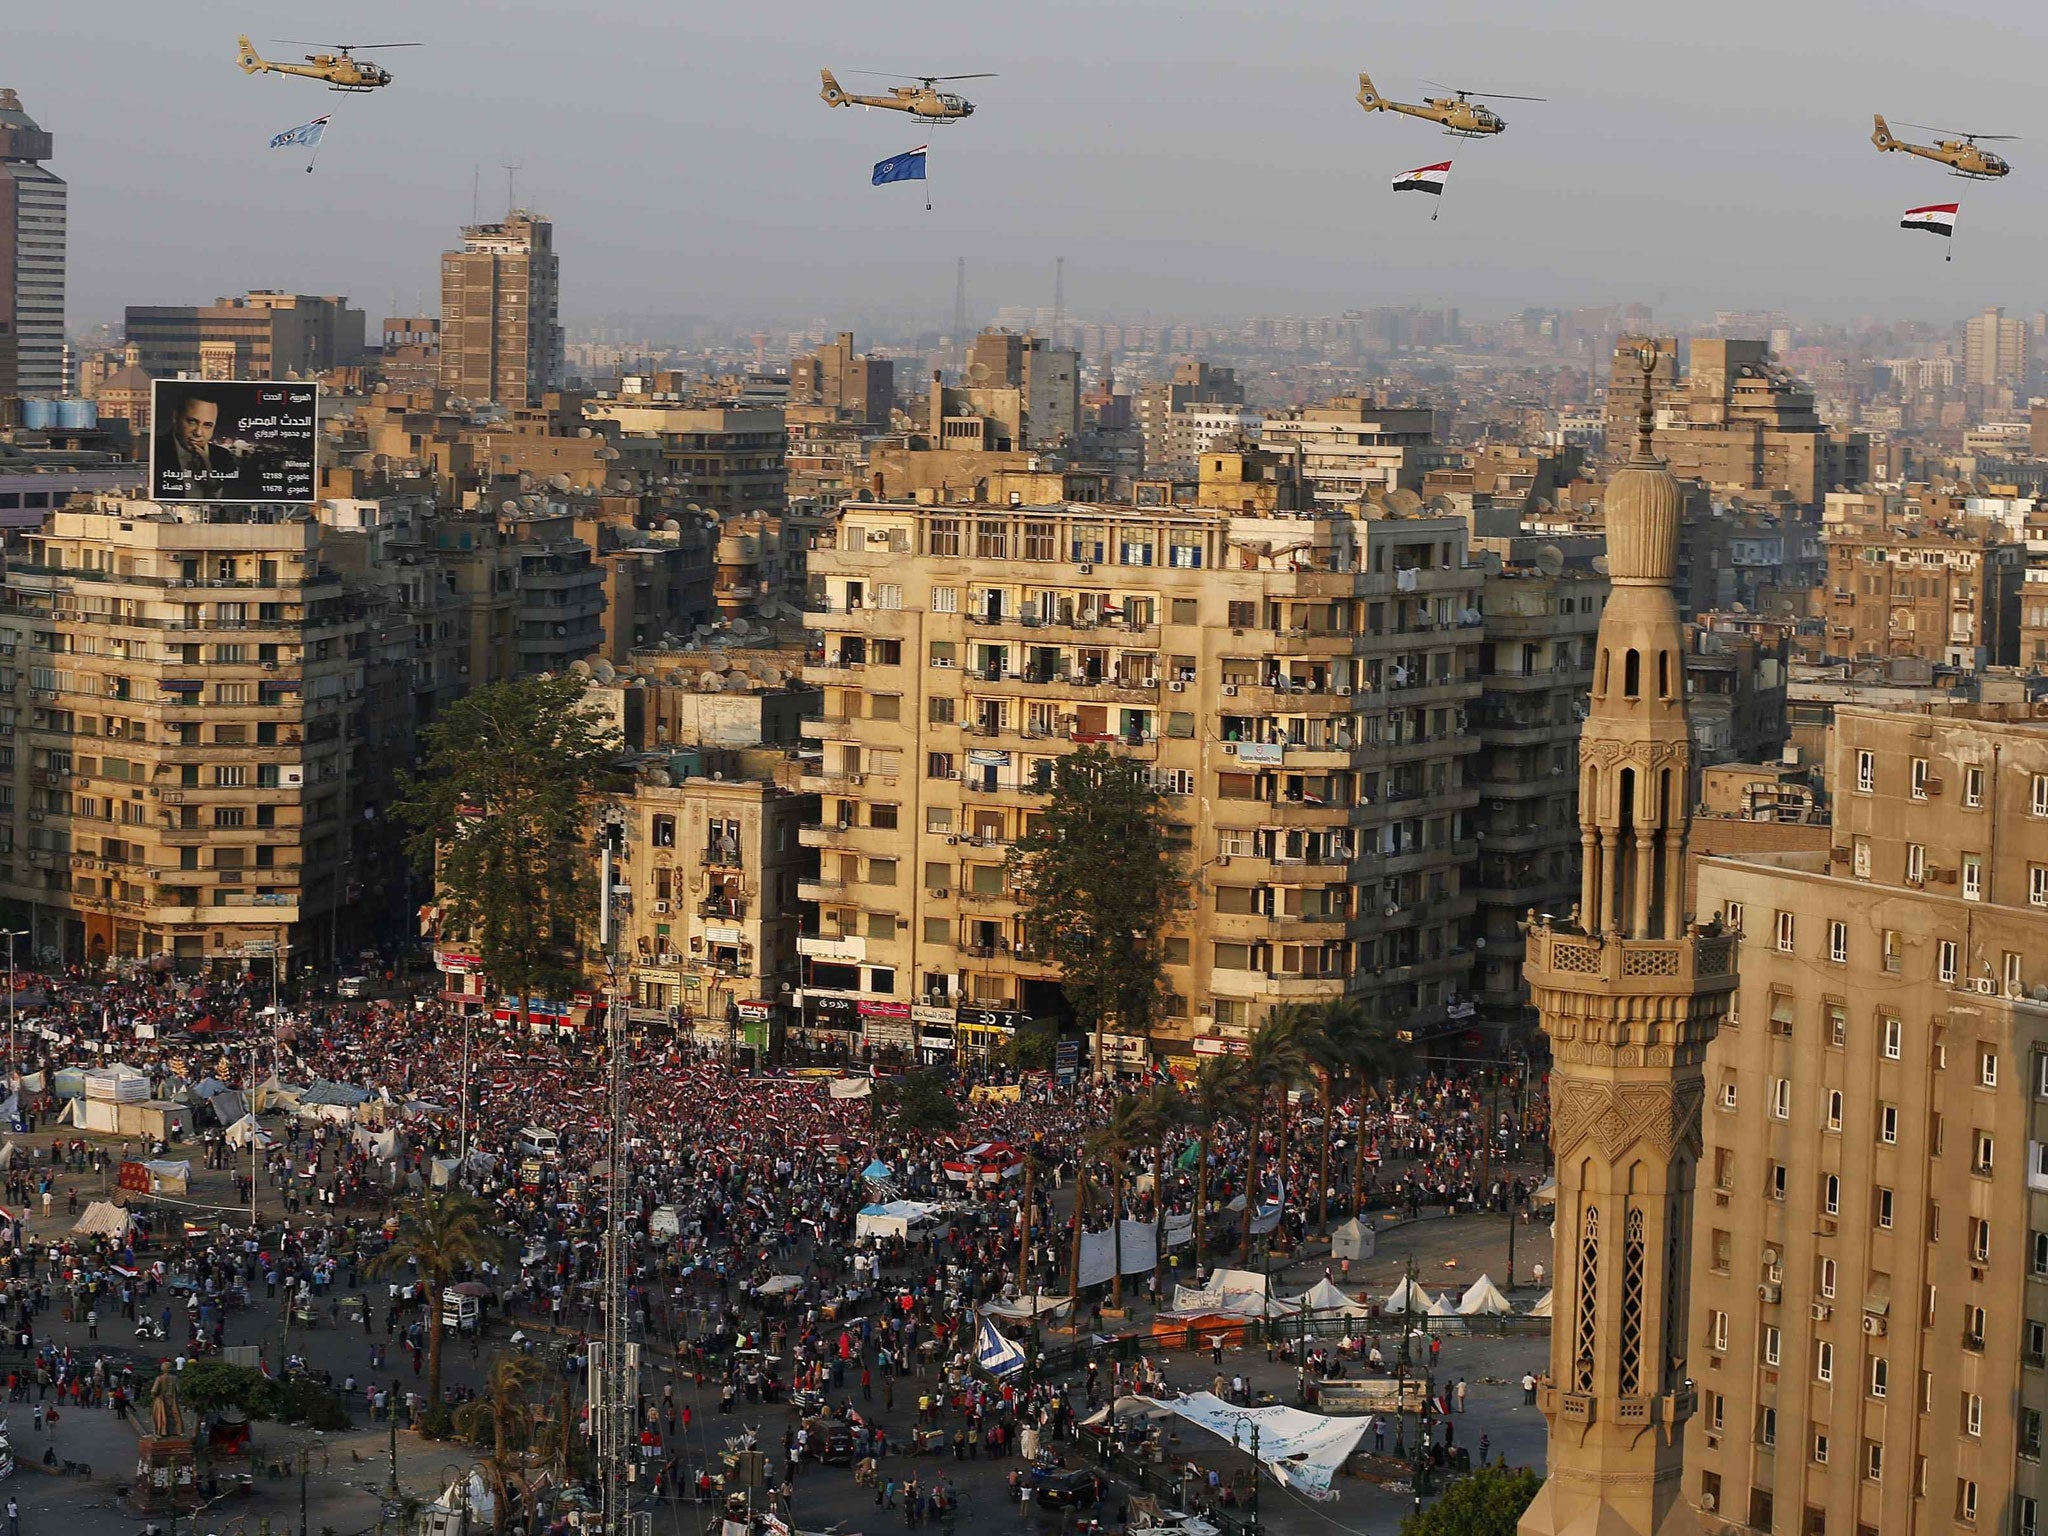 A view shows a fly-past over protesters against ousted Egyptian President Mohamed Morsi, in Tahrir Square